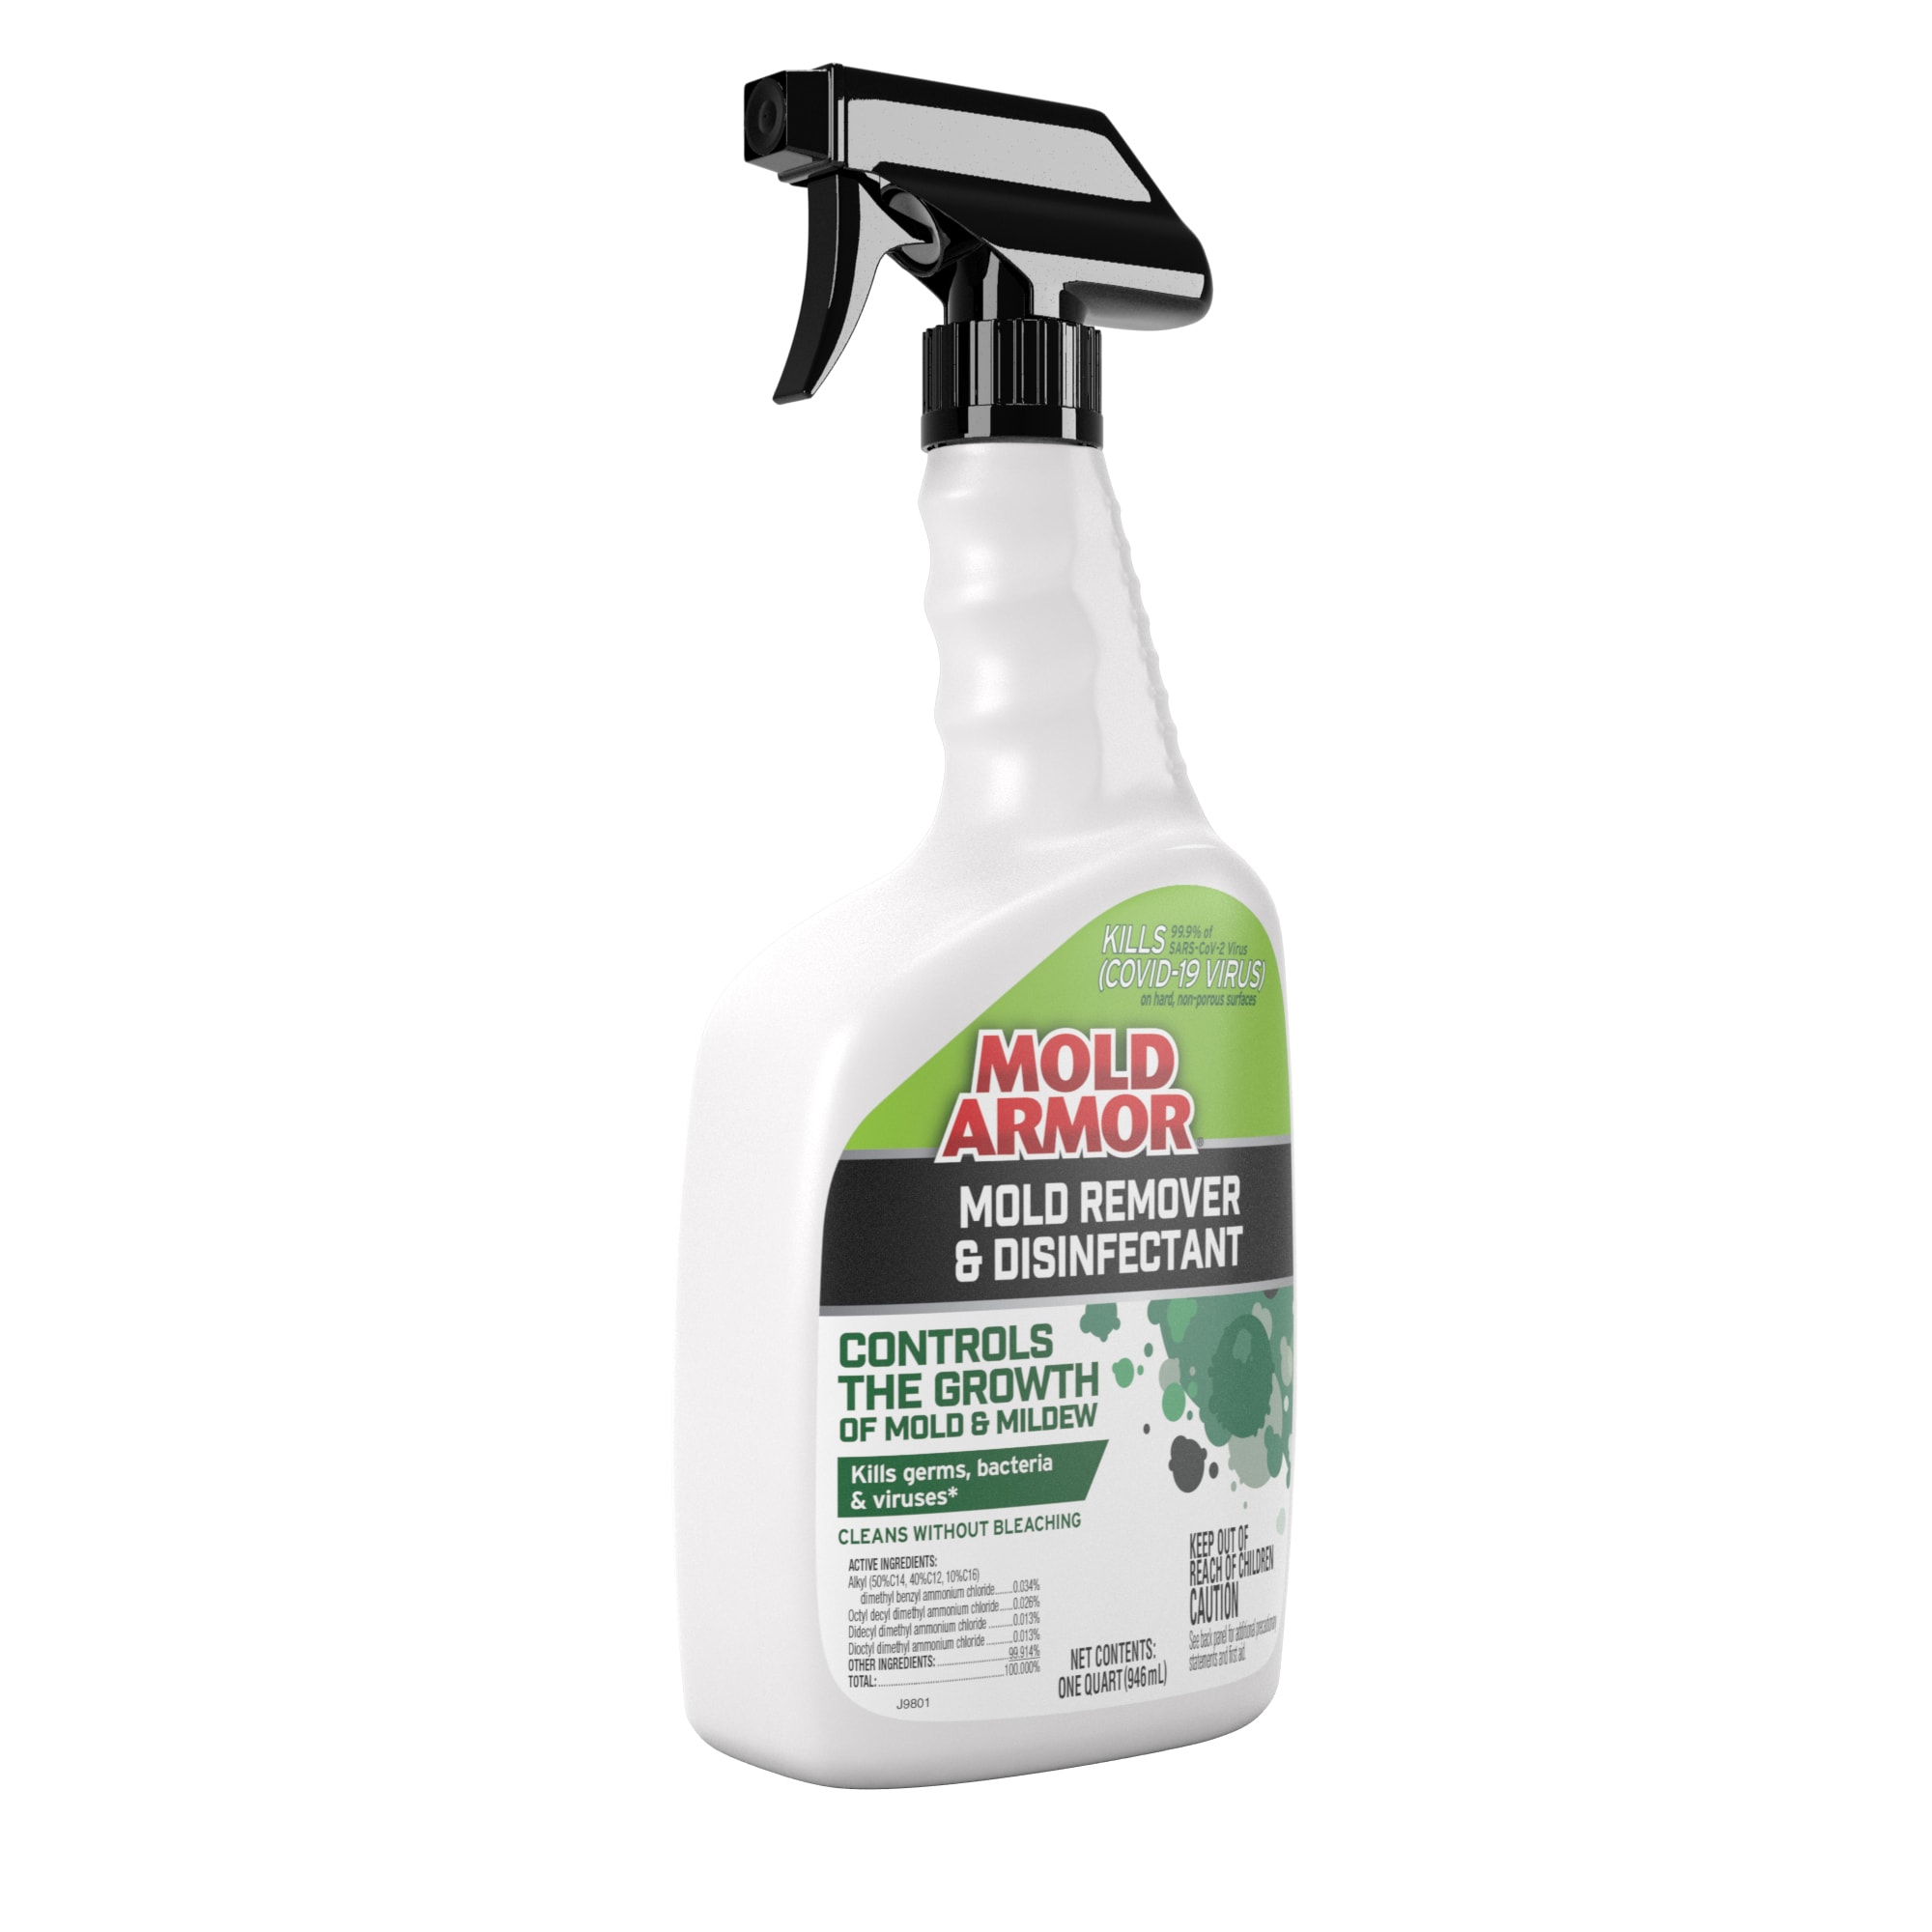 Mold Armor Mold Remover and Disinfectant Cleaner - 32 oz. Spray